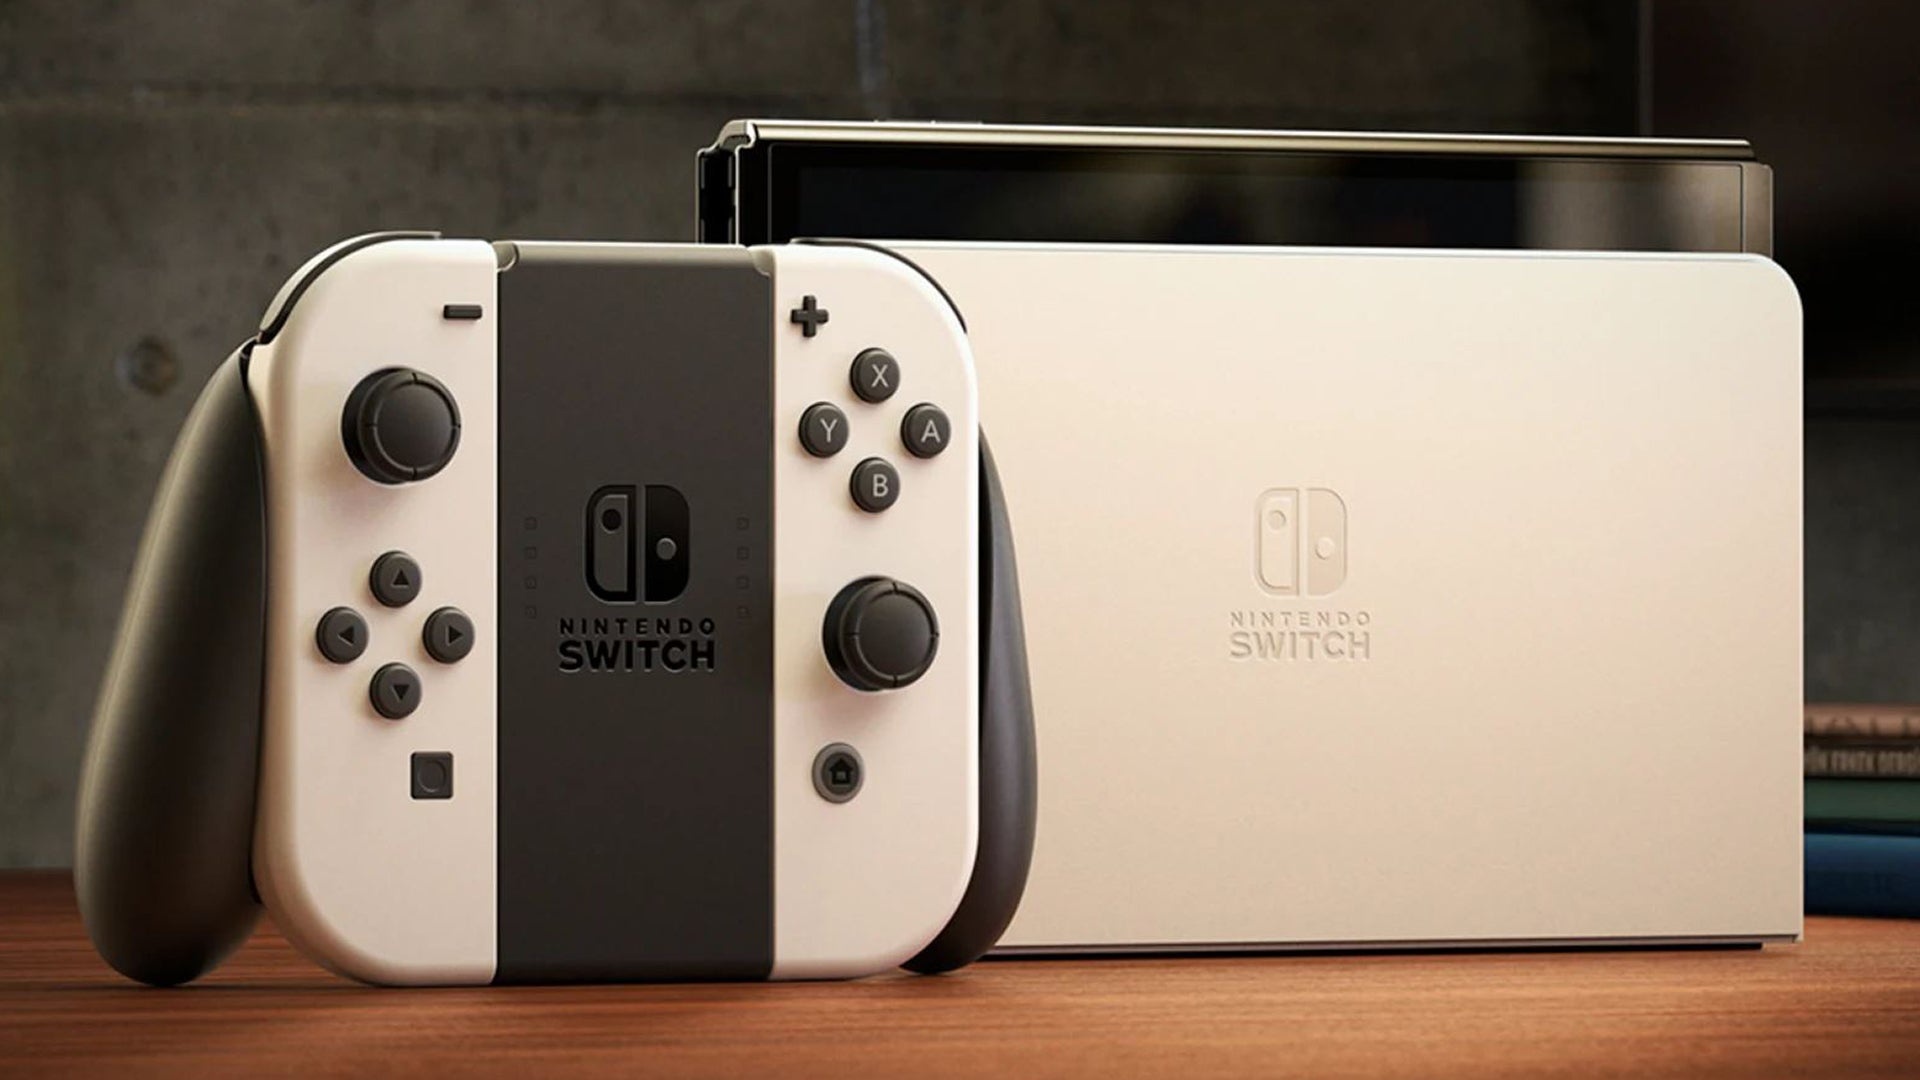 Nintendo: The Switch OLED, Wide adjustable stand, A dock with a wired LAN port. 1920x1080 Full HD Background.